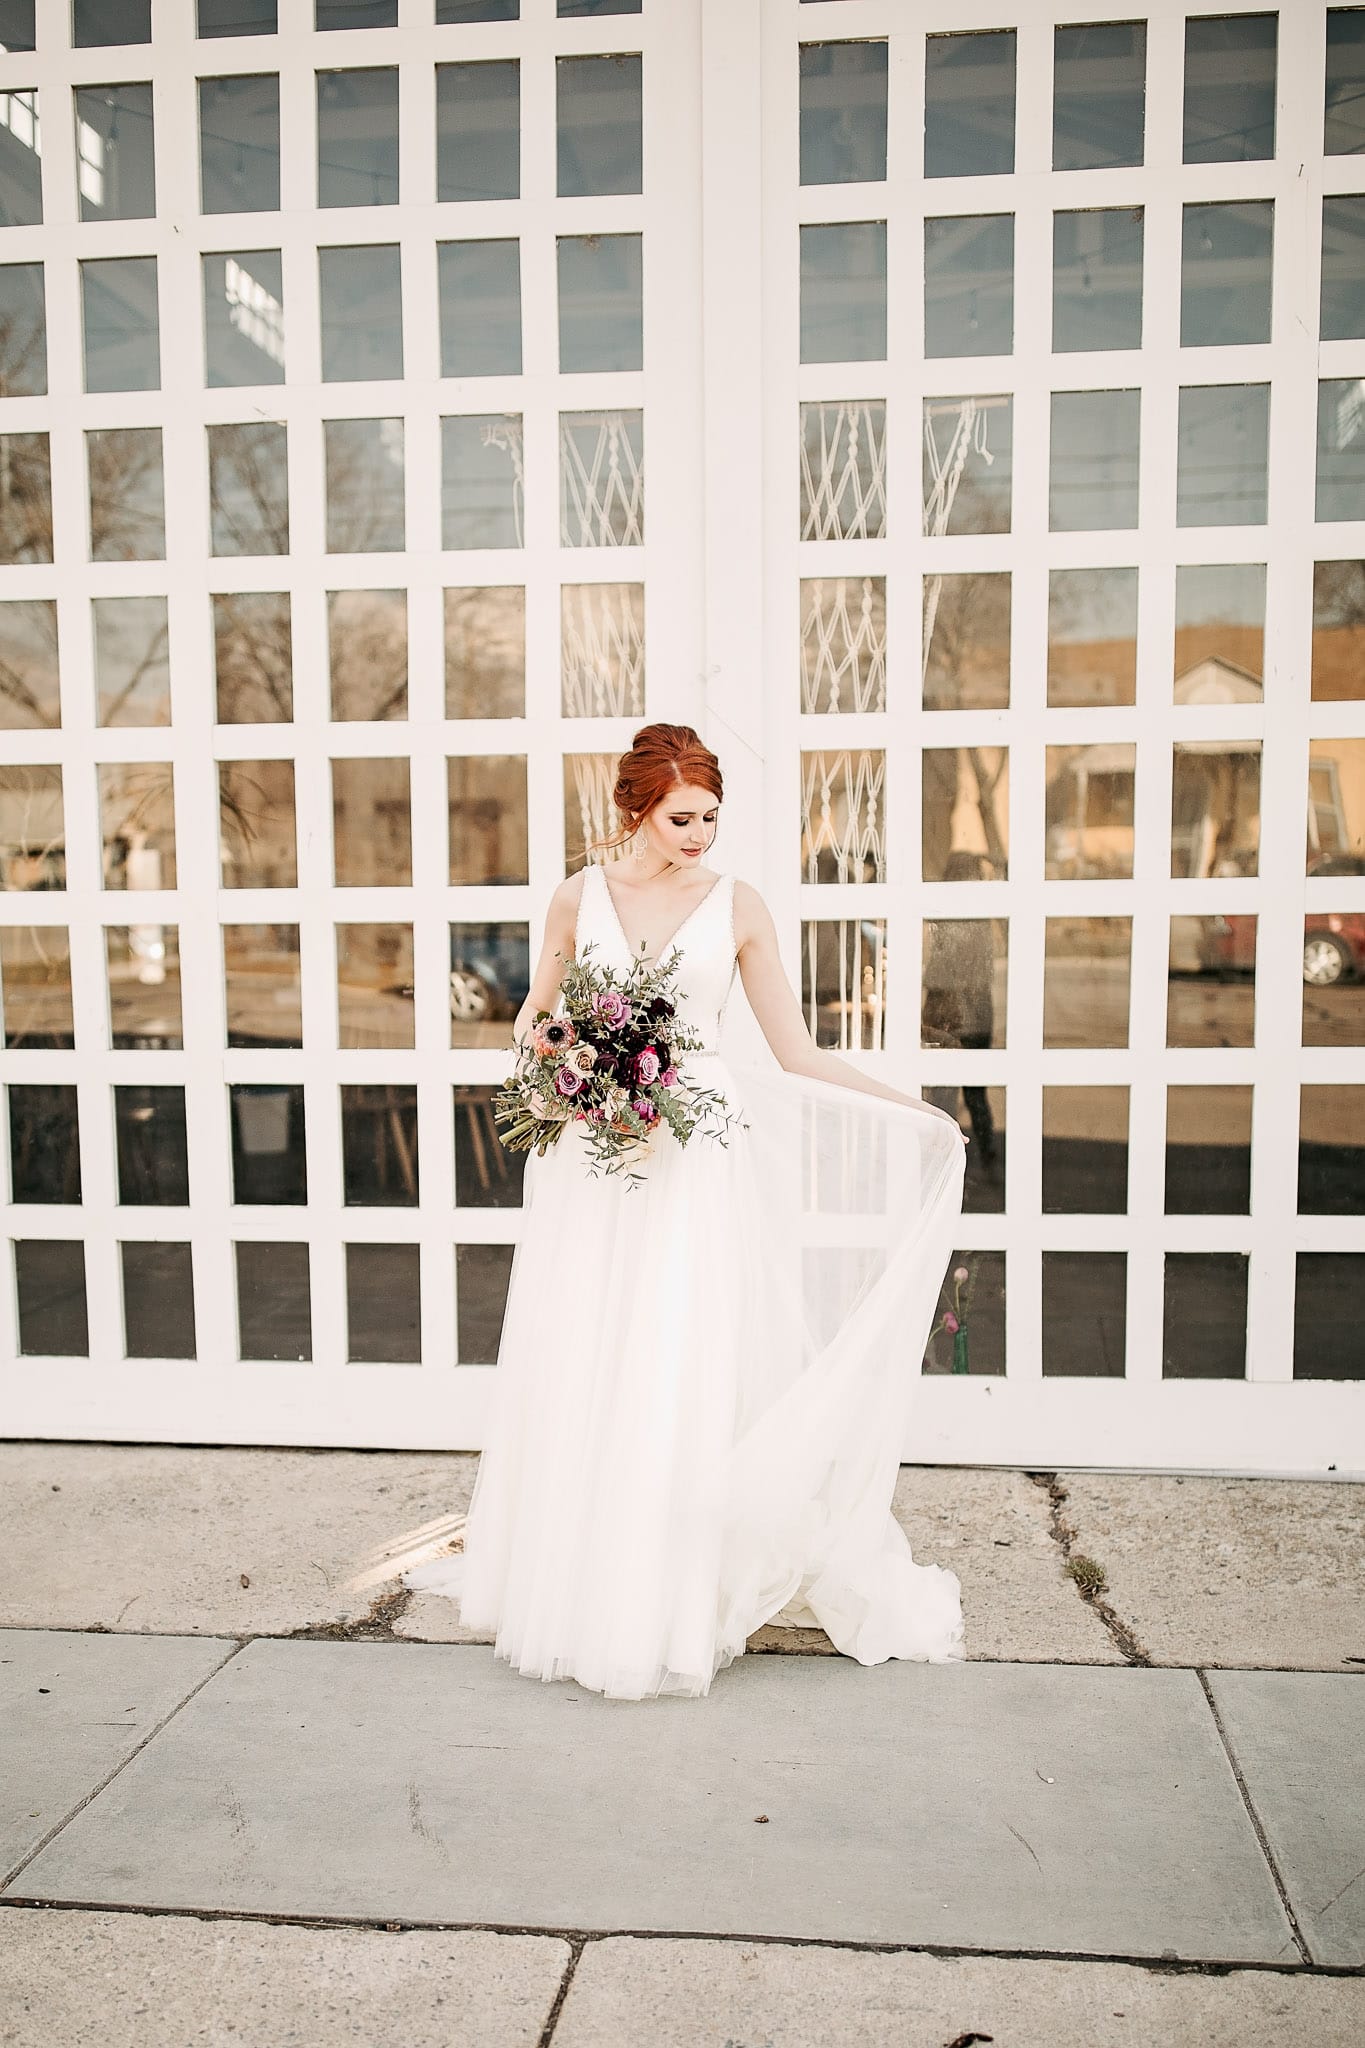 Chic and Romantic Styled Shoot Featuring Four Maggie Sottero Wedding Gowns.